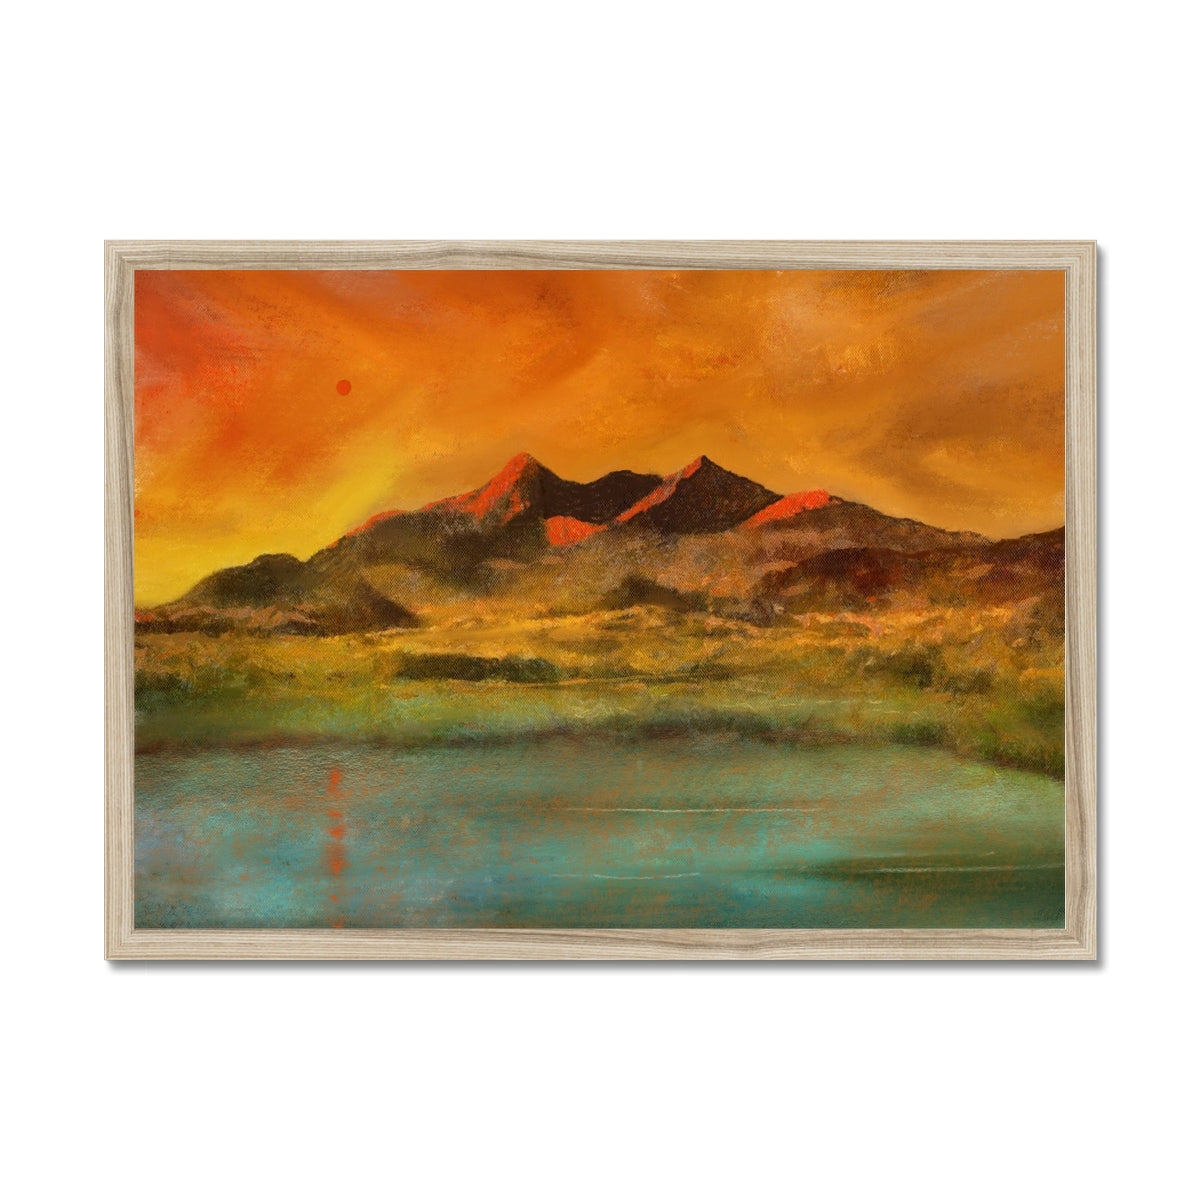 Skye Red Moon Cuillin Painting | Framed Prints From Scotland-Framed Prints-Skye Art Gallery-A2 Landscape-Natural Frame-Paintings, Prints, Homeware, Art Gifts From Scotland By Scottish Artist Kevin Hunter